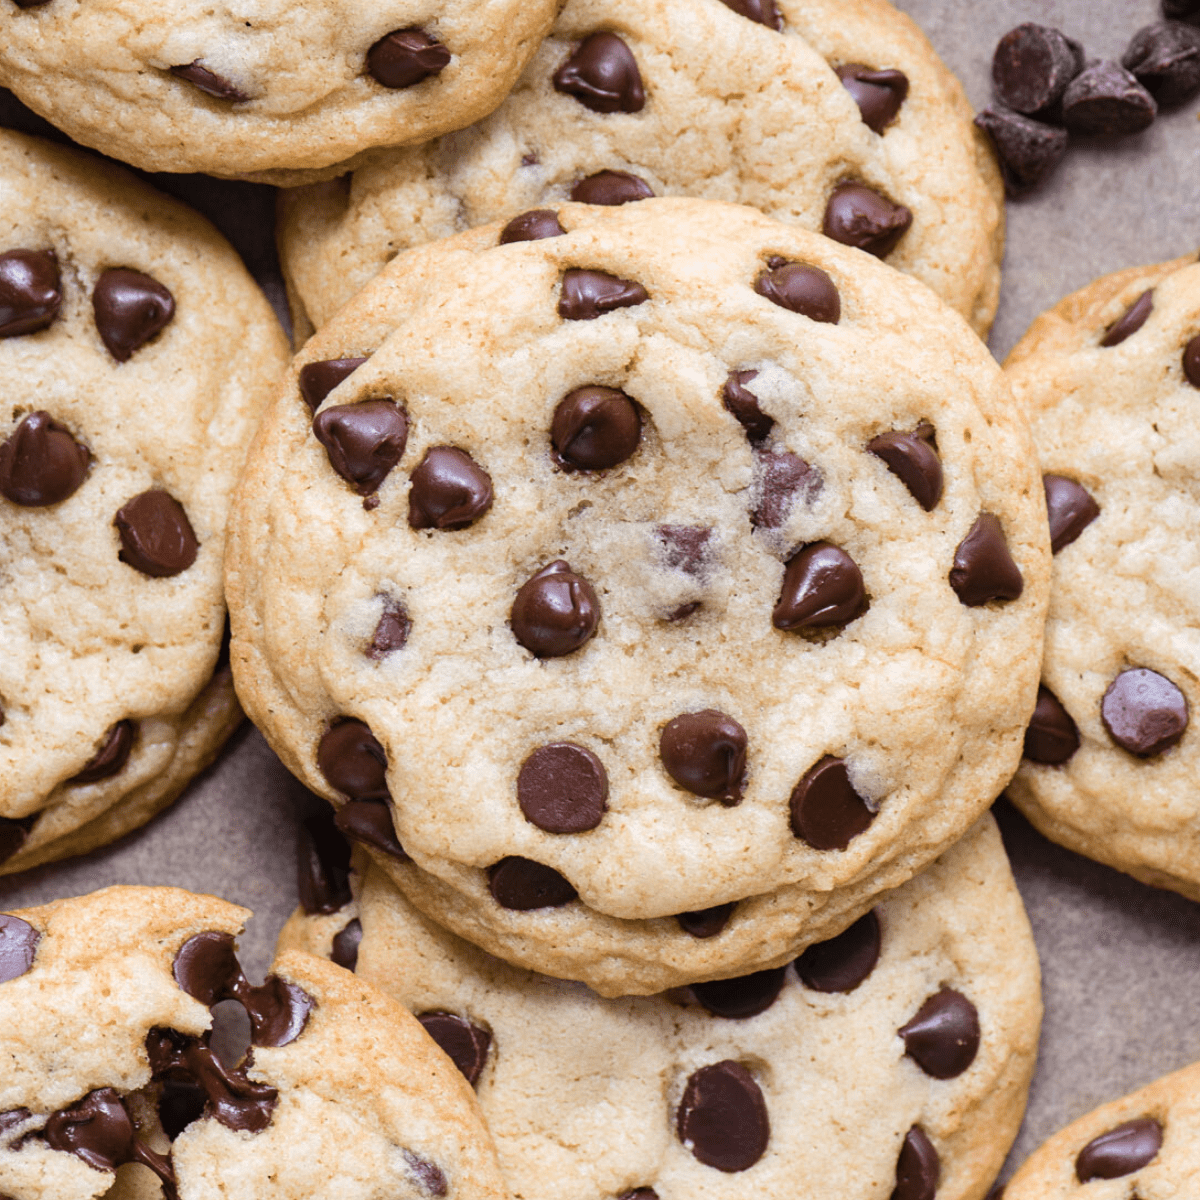 https://thefirstyearblog.com/wp-content/uploads/2022/01/Gluten-free-chocolate-chip-cookies-2022-Square-1.png